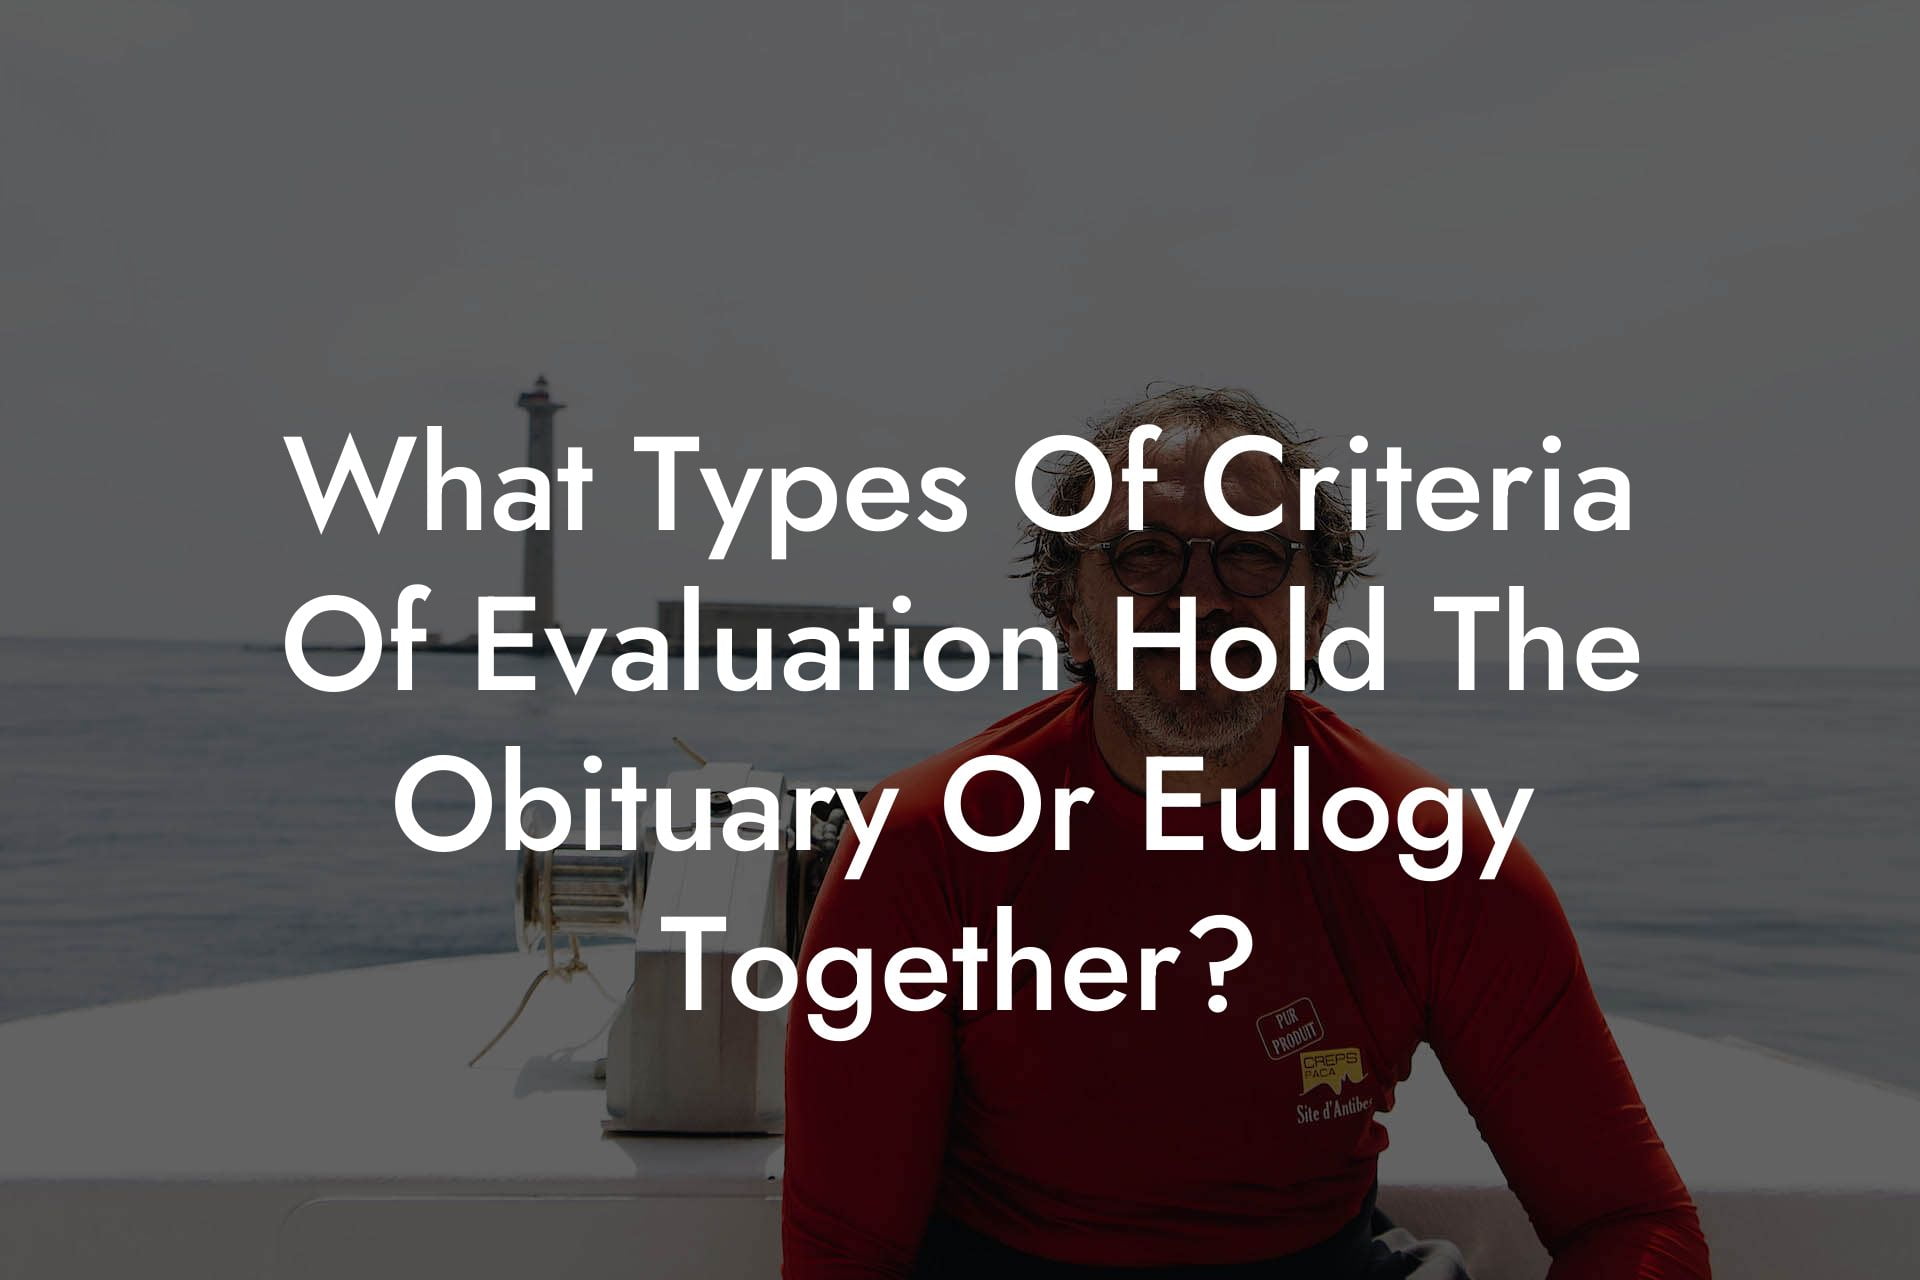 What Types Of Criteria Of Evaluation Hold The Obituary Or Eulogy Together?